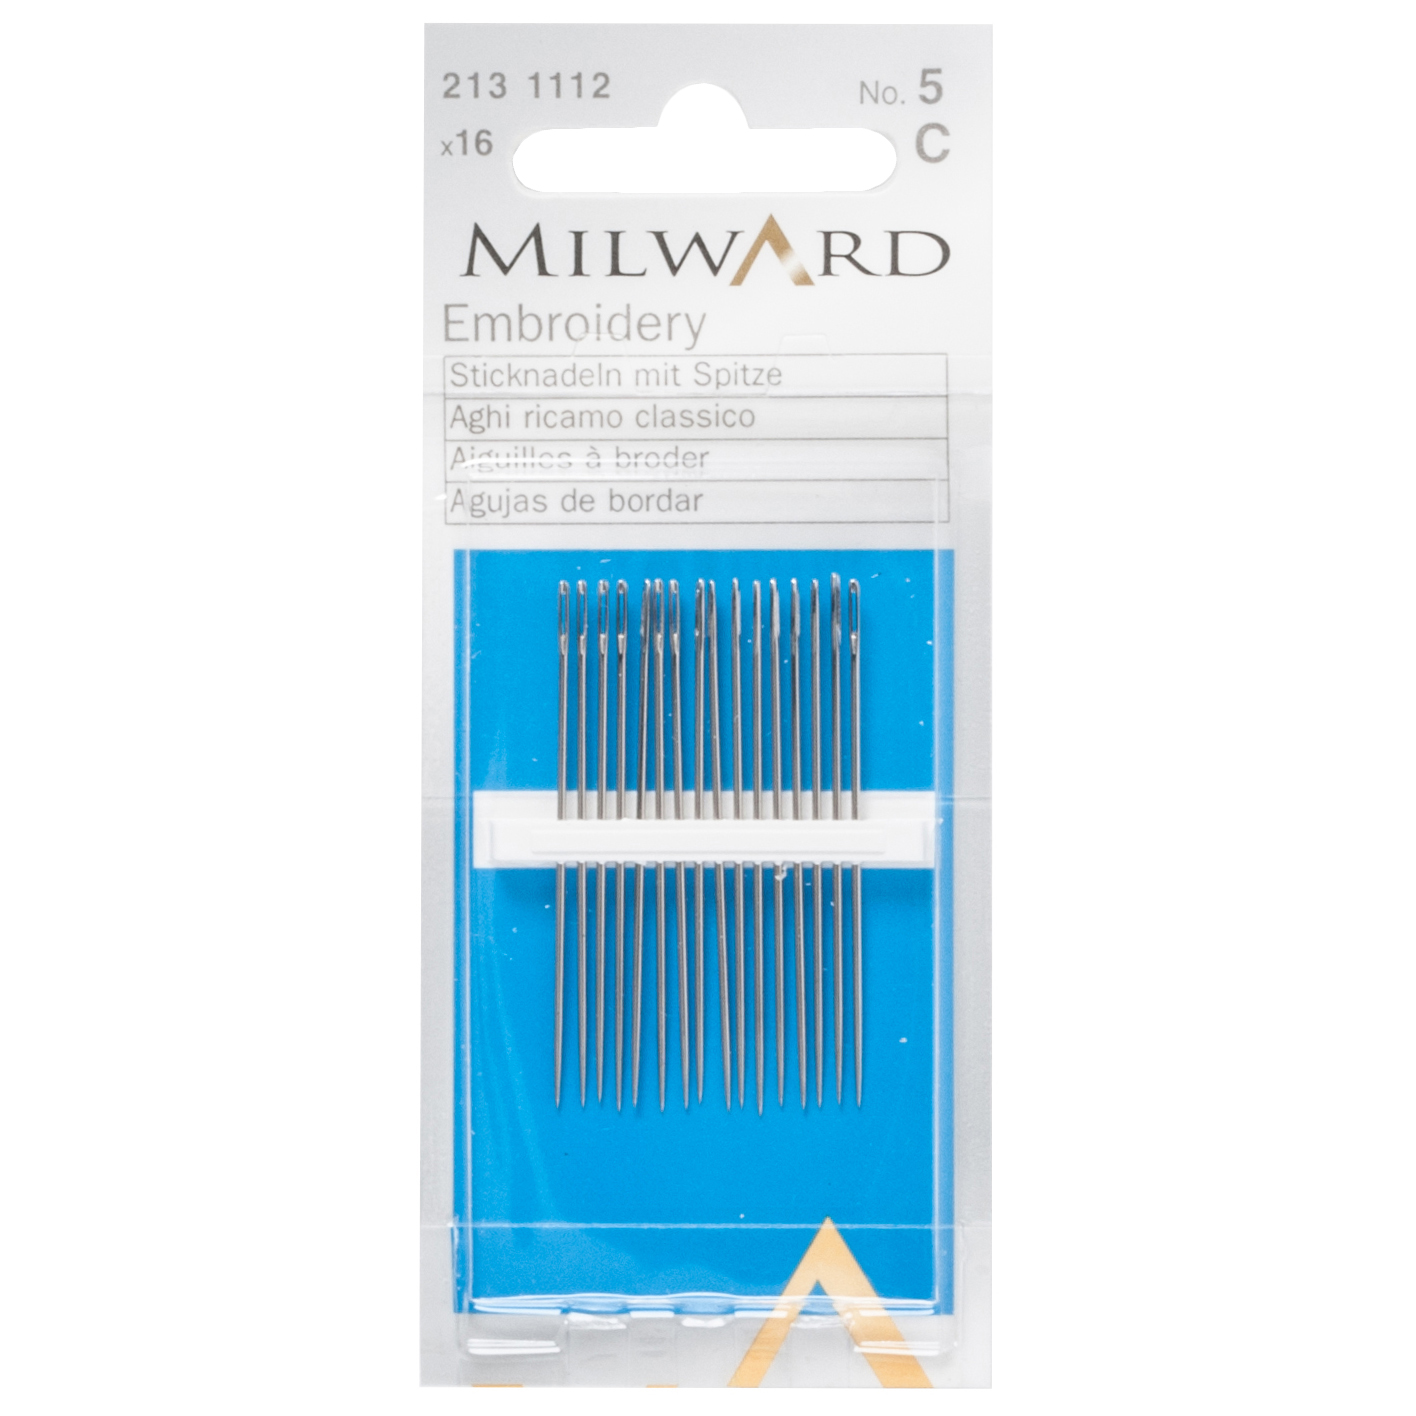 Hemline Hand Sewing Needles: Embroidery/Crewel: 16 Pieces